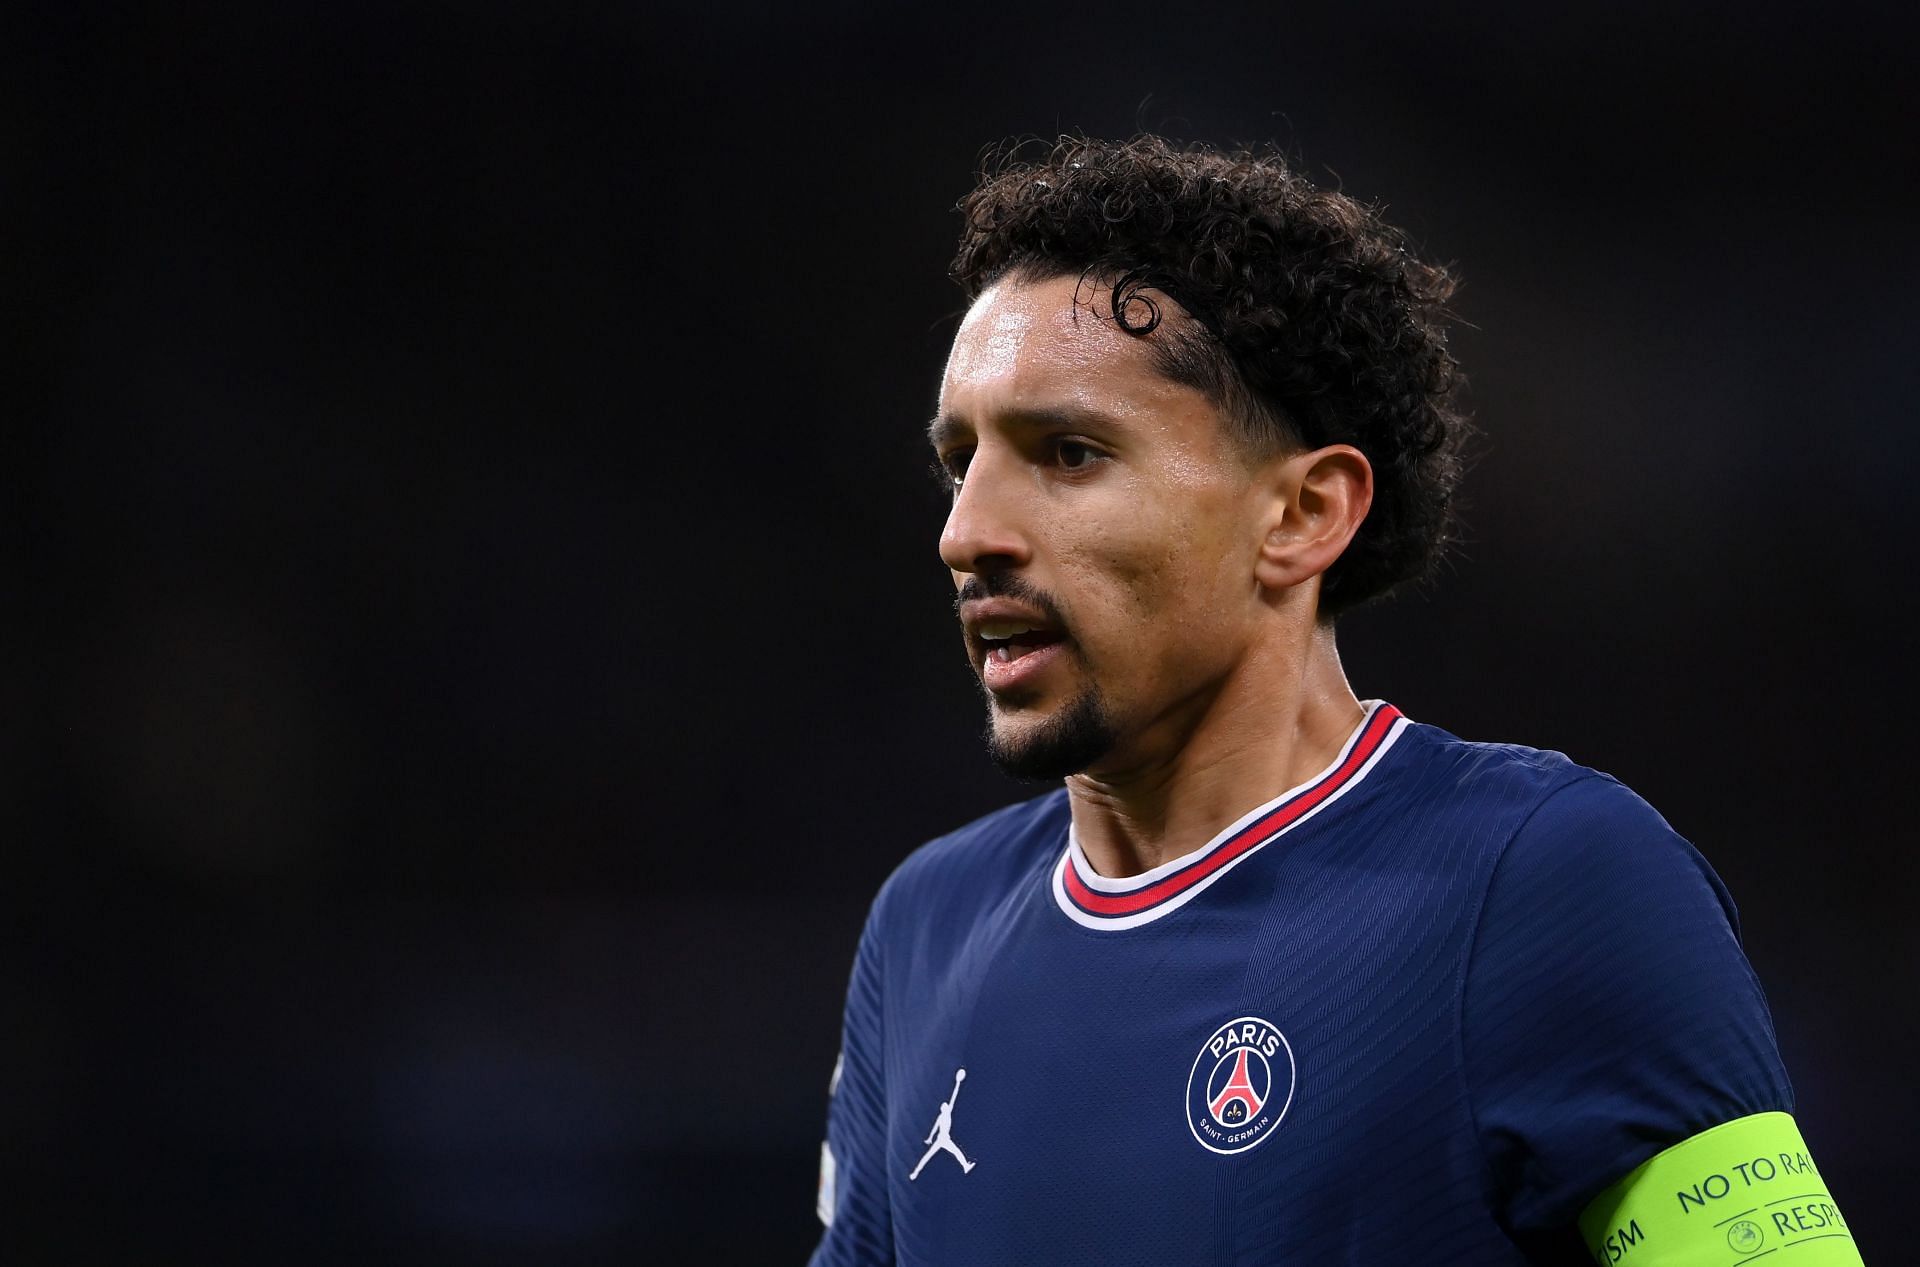 PSG are currently locked in negotiations with Marquinhos regarding a new contract.